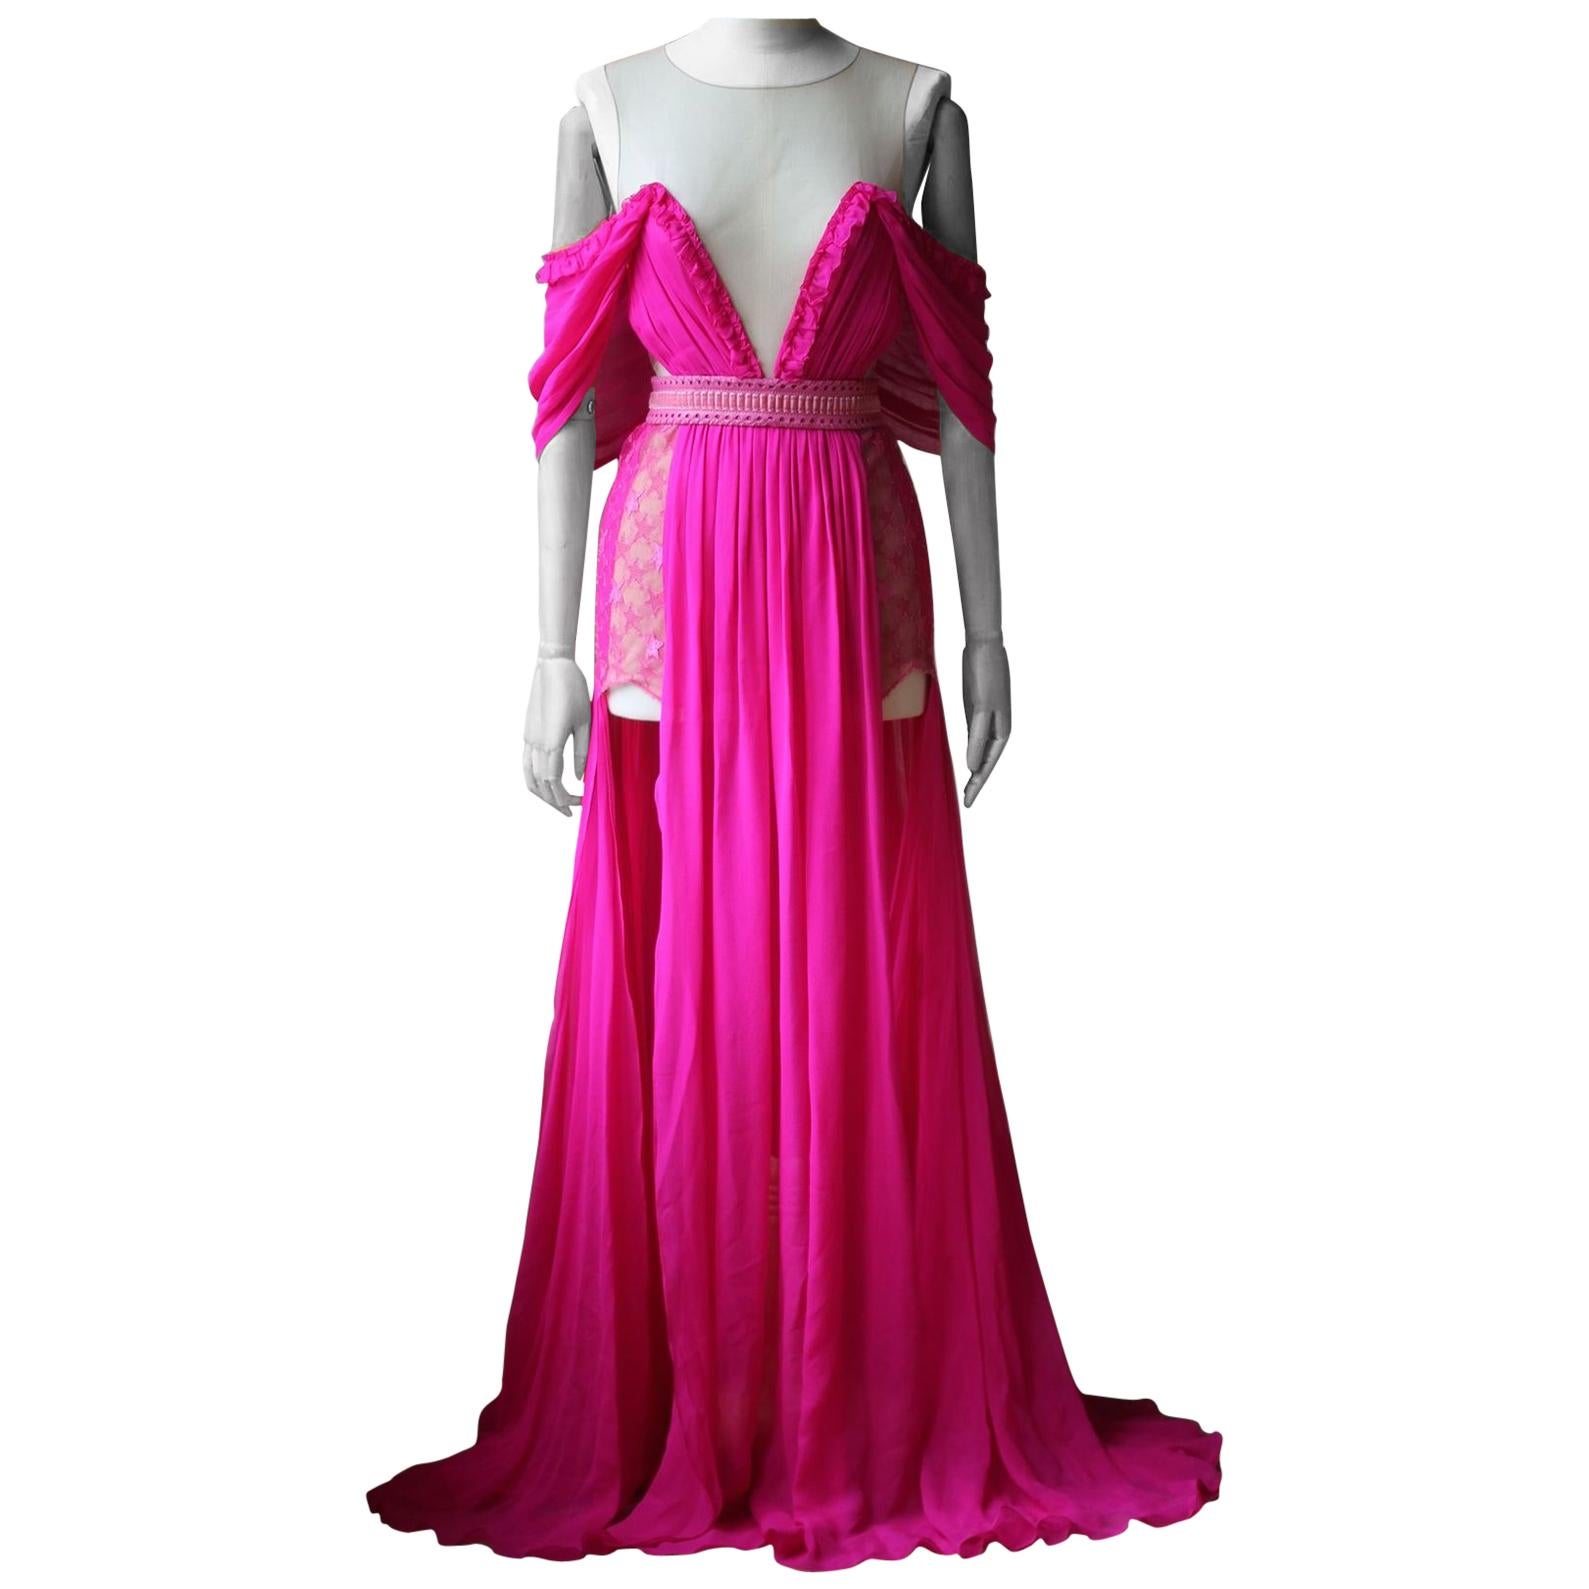 Aadnecik French Lace Silk Chiffon Gown with Leather Detail 